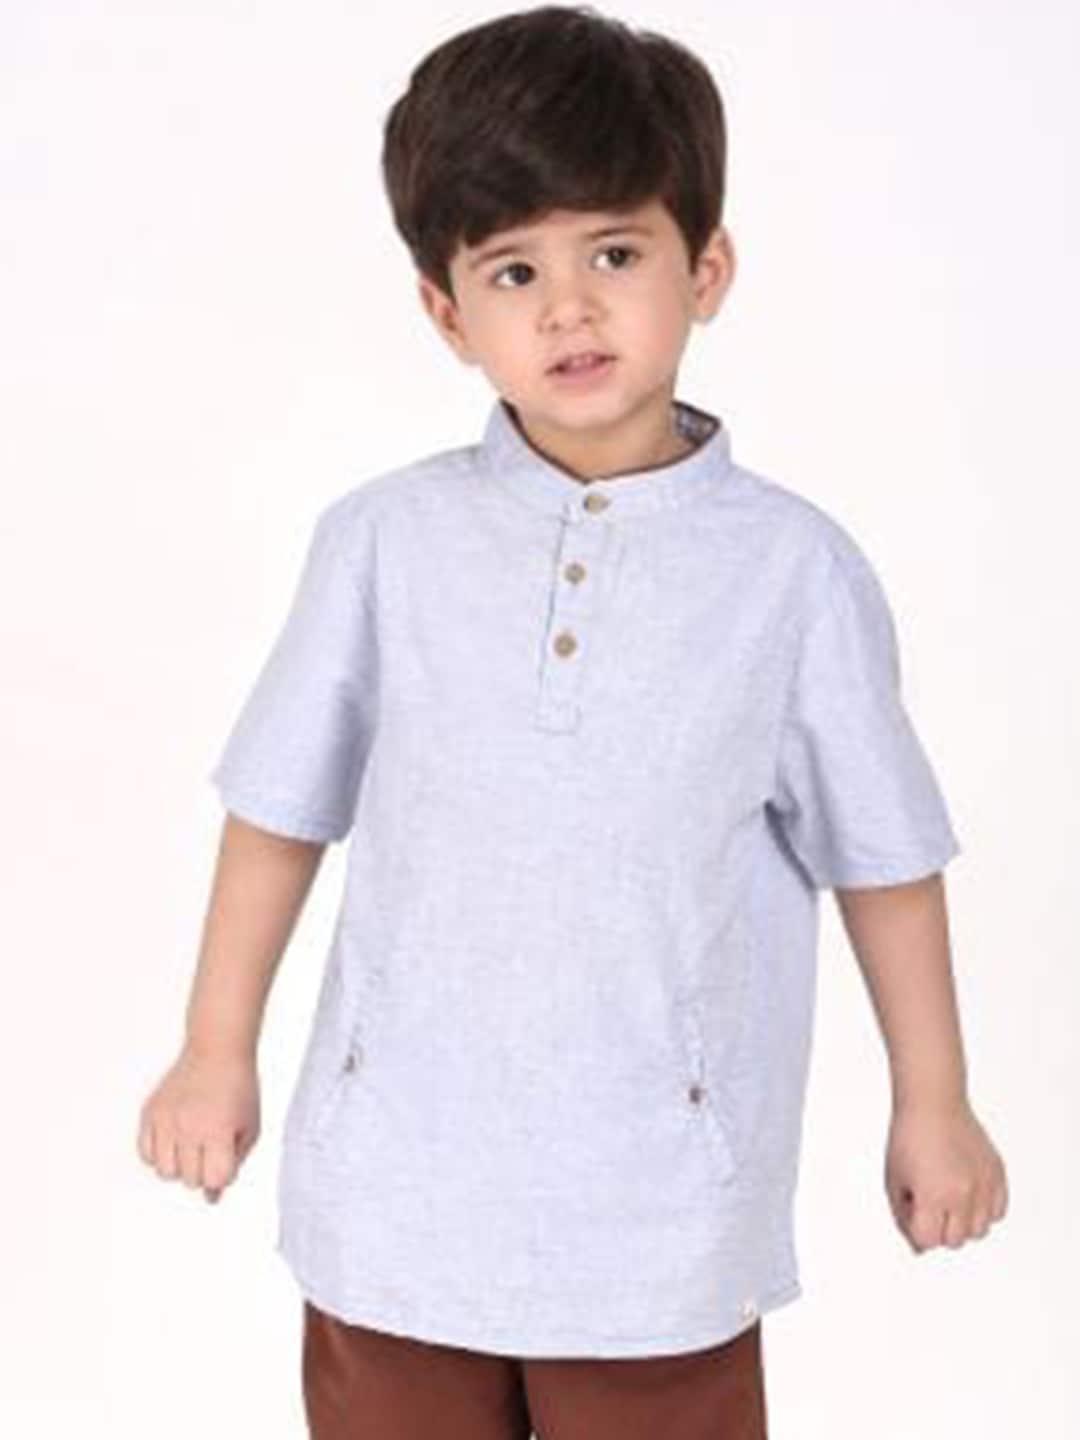 Biglilpeople Boys White & Brown Solid Cotton Blend Clothing Set